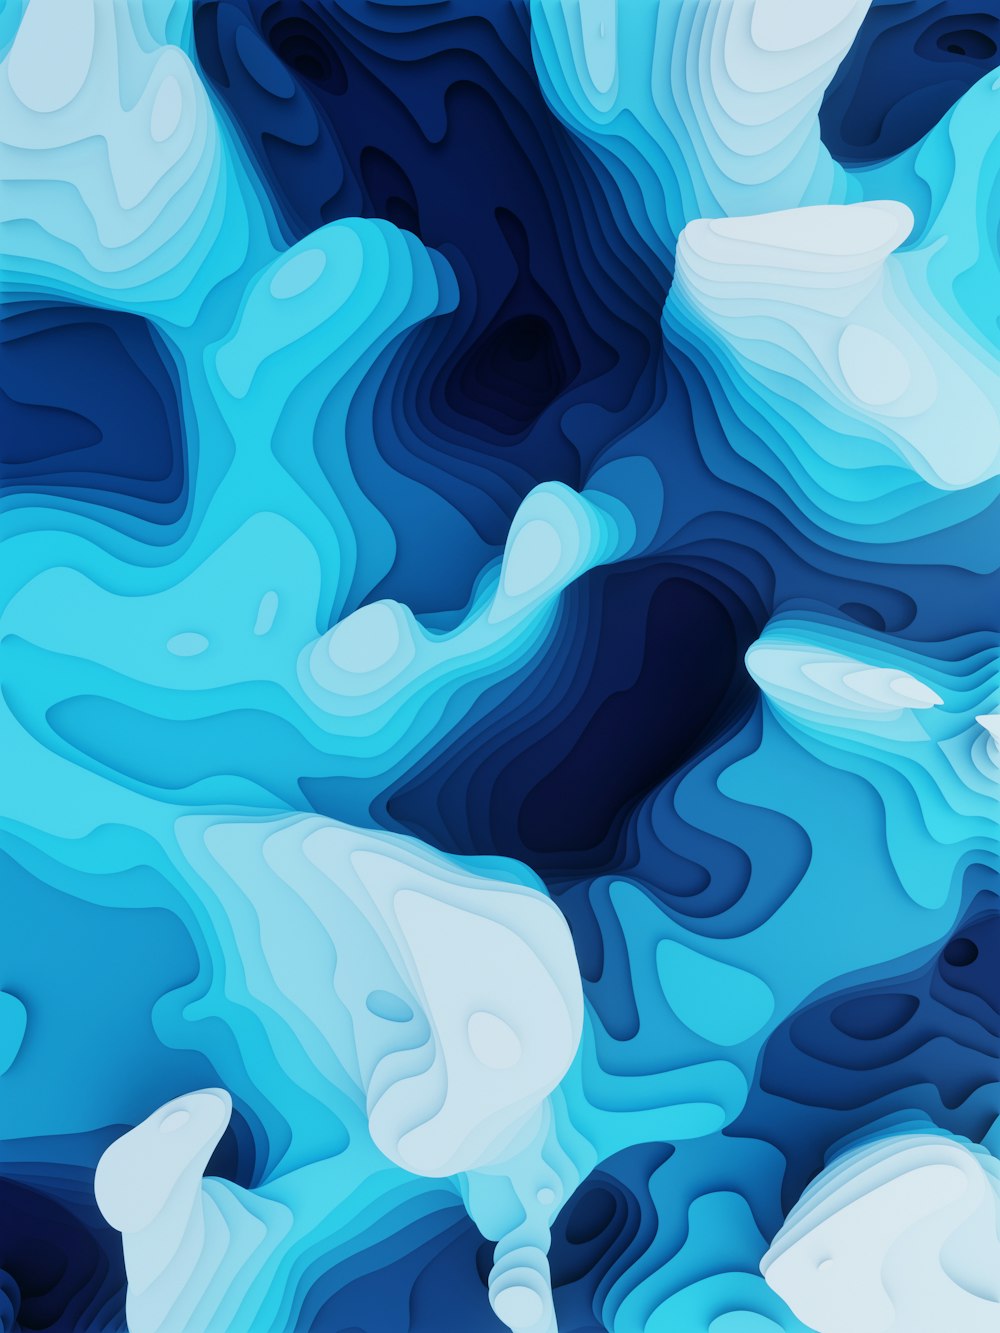 a blue and white abstract background with wavy shapes